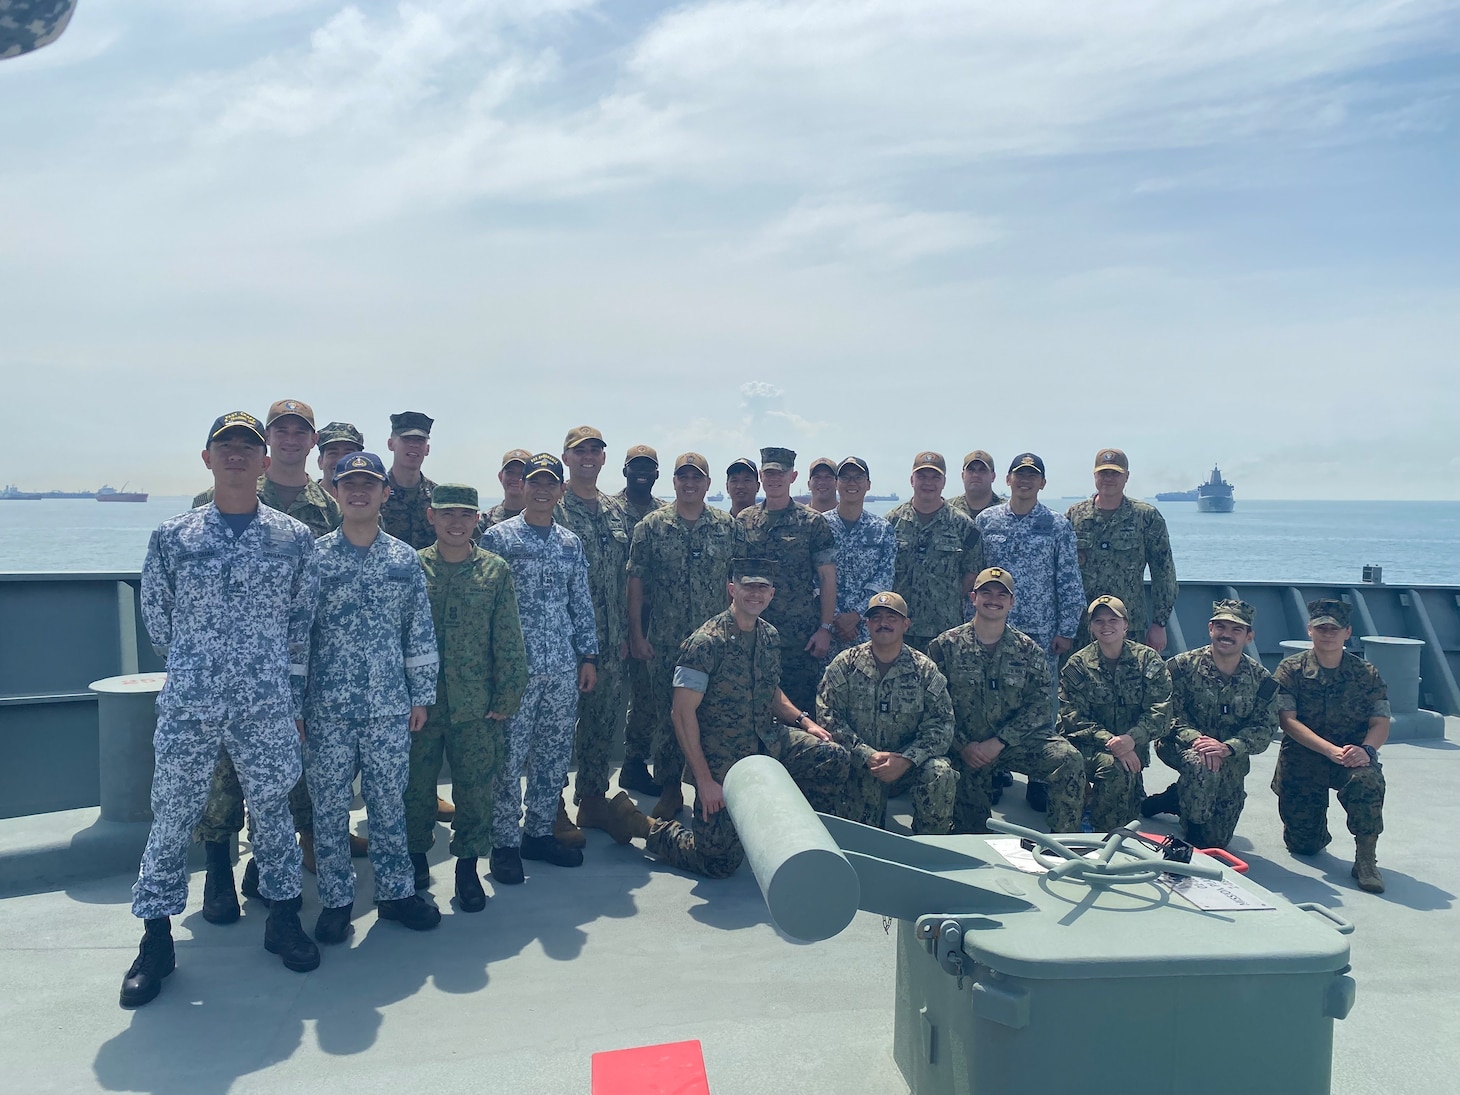 Commanders and leaders from Destroyer Squadron 7, the Makin Island Amphibious Ready Group, 13th Marine Expeditionary Unit, and the Republic of Singapore Navy pose for a photo aboard RSS Endurance (207) during Cooperation Afloat Readiness and Training/Marine Exercise Singapore in the waters off Singapore, Jan. 12. CARAT/MAREX Singapore is a bilateral exercise between Singapore and the United States designed to promote regional security cooperation, maintain and strengthen maritime partnerships, and enhance maritime cooperation. In its 28th year, the CARAT series is comprised of multinational exercises, designed to enhance U.S. and partner navies’ abilities to operate together in response to traditional and non-traditional maritime security challenges in the Indo-Pacific region.